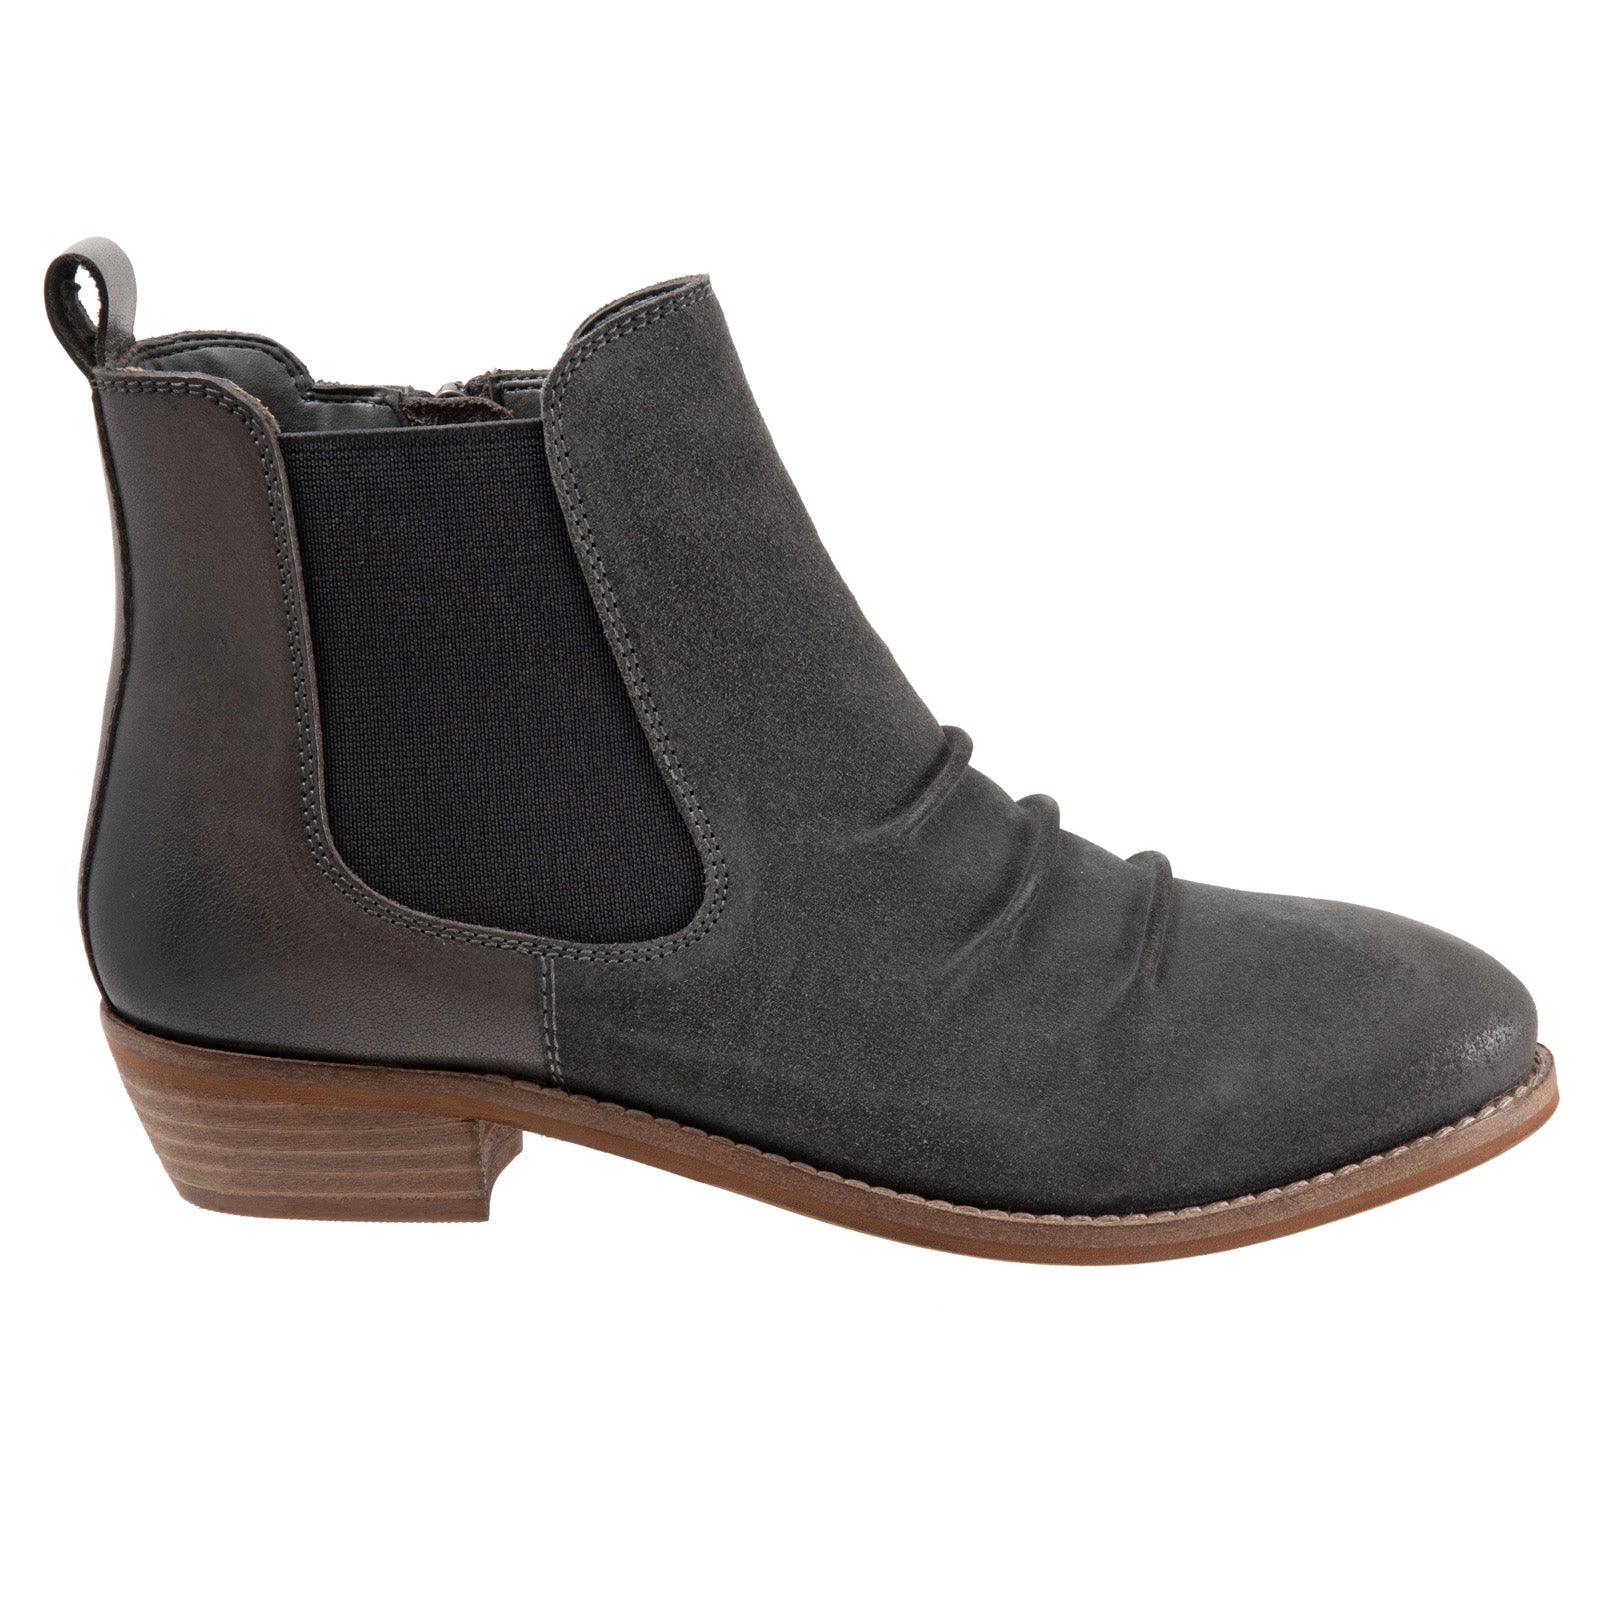 Softwalk Rockford S2058-097 Womens Gray Wide Suede Ankle & Booties Boots